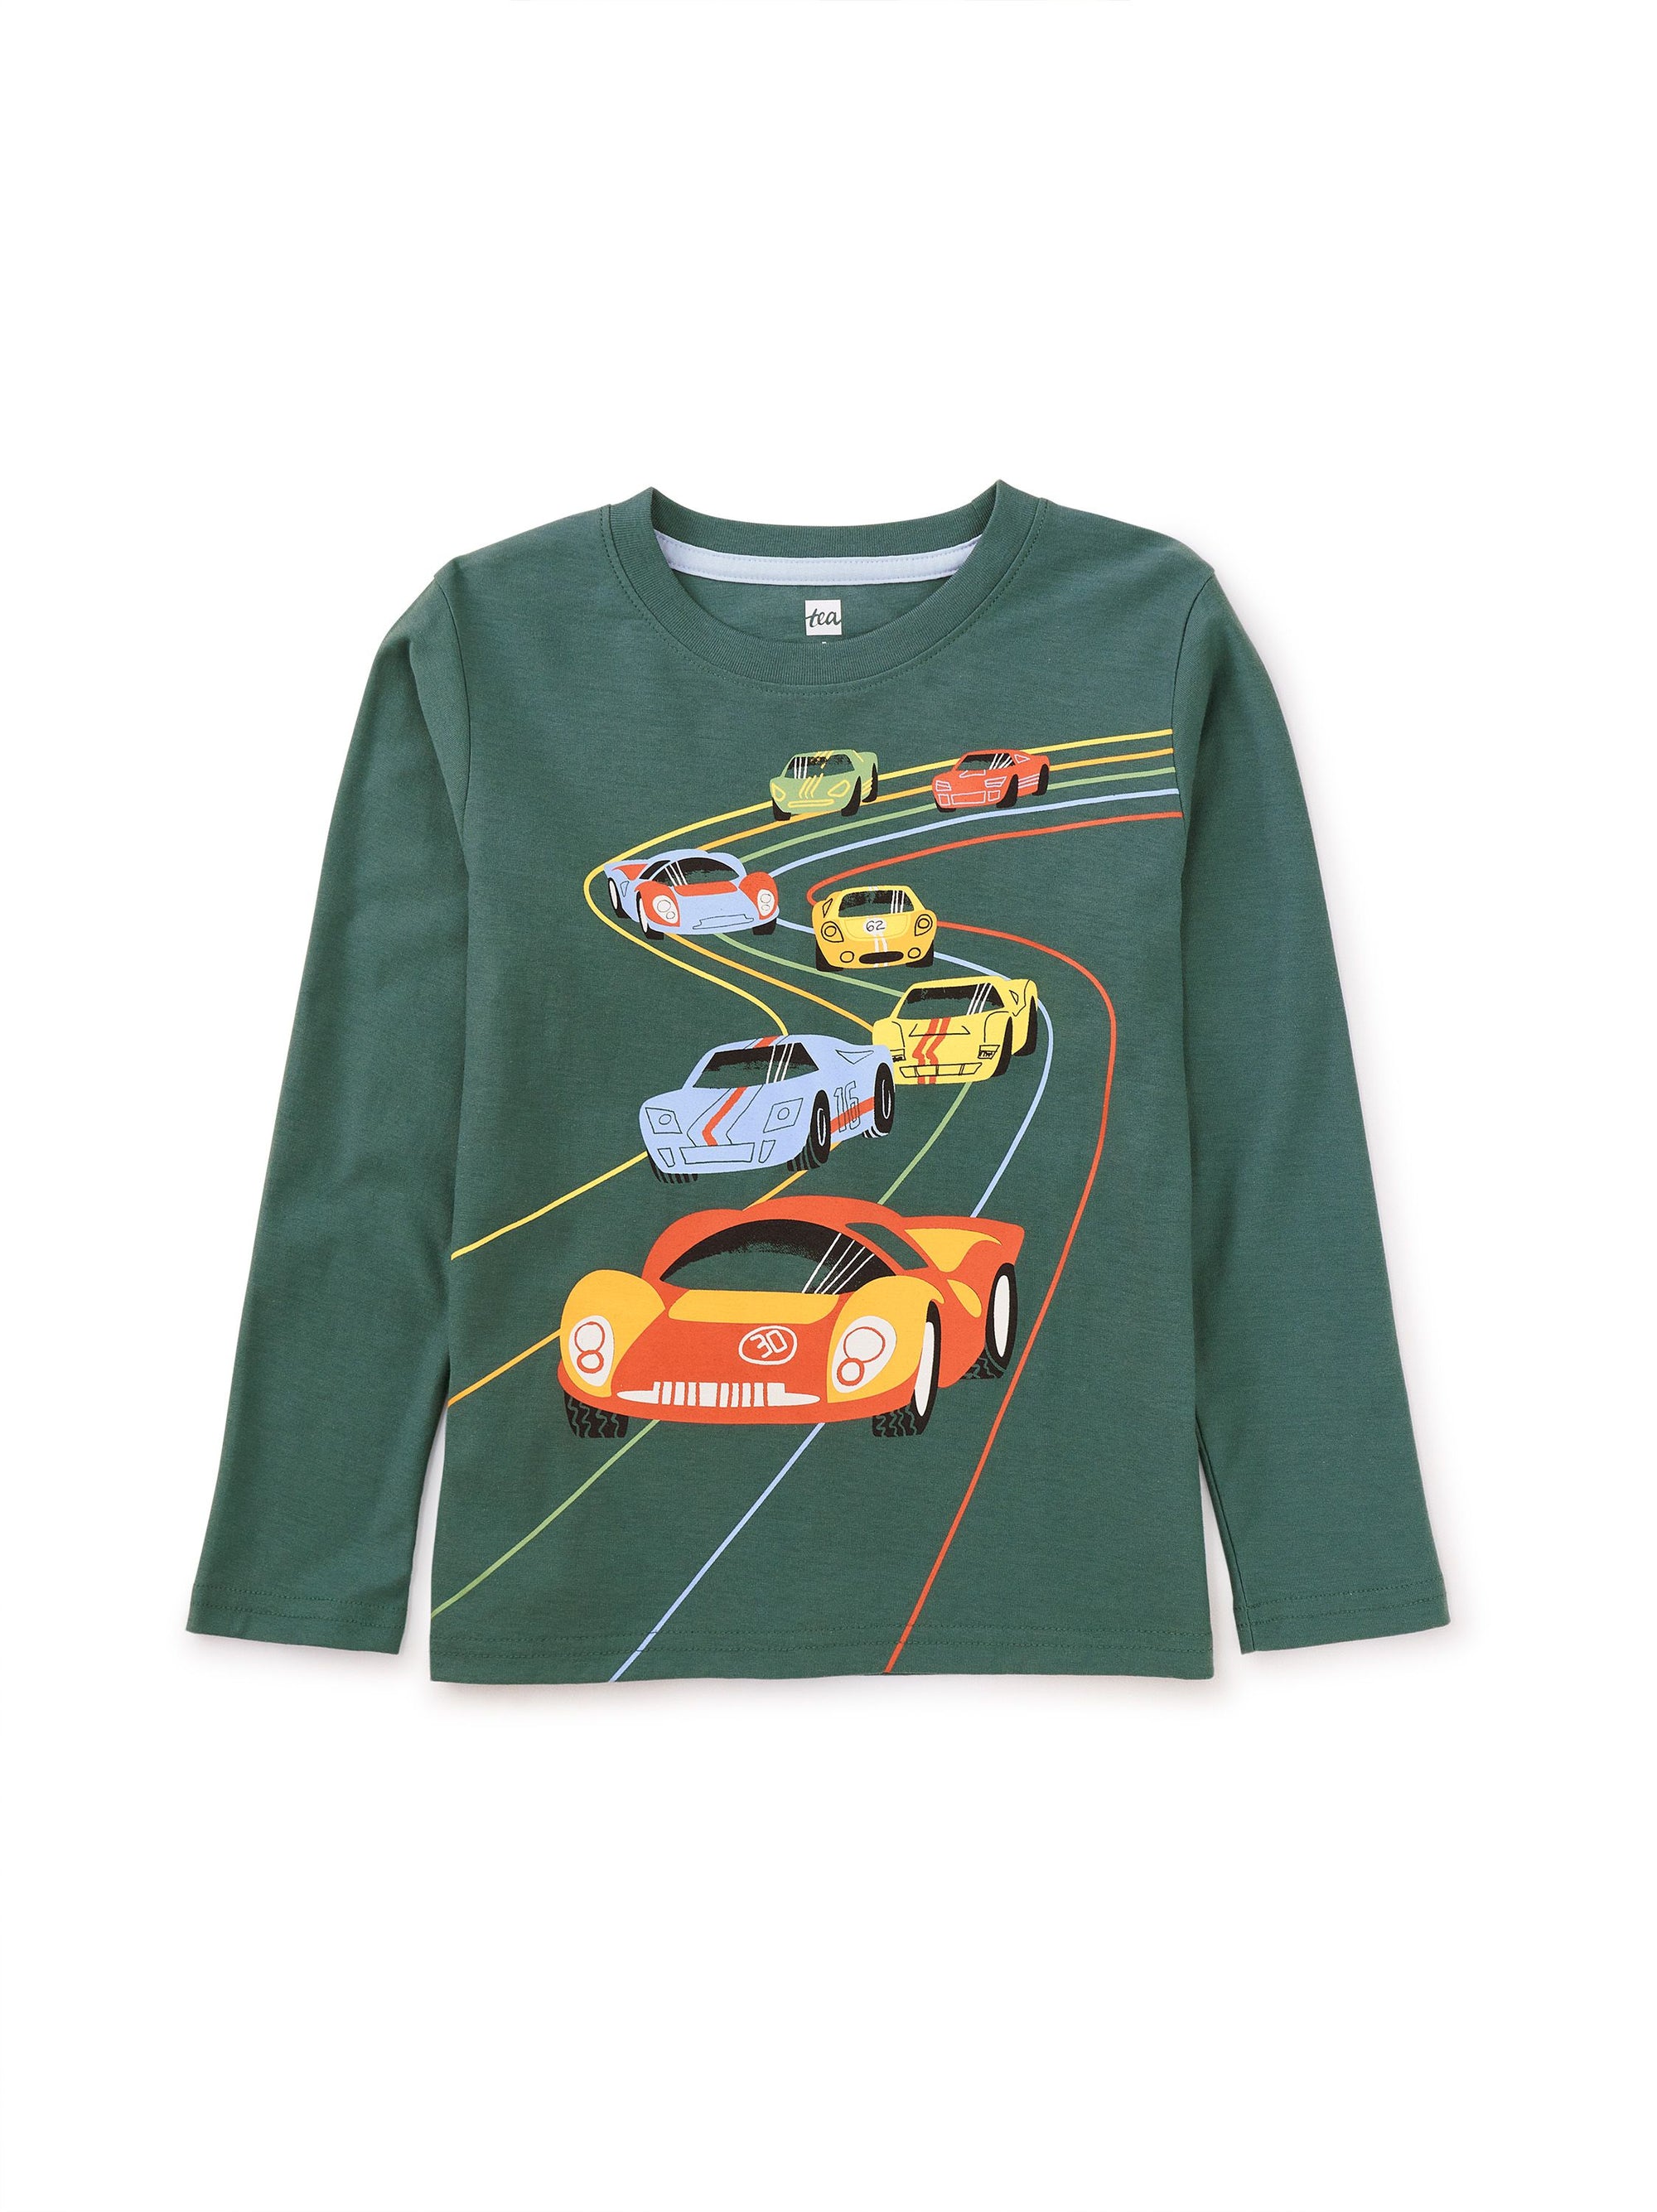 Le Mans Race Graphic Tee - Silver Pine